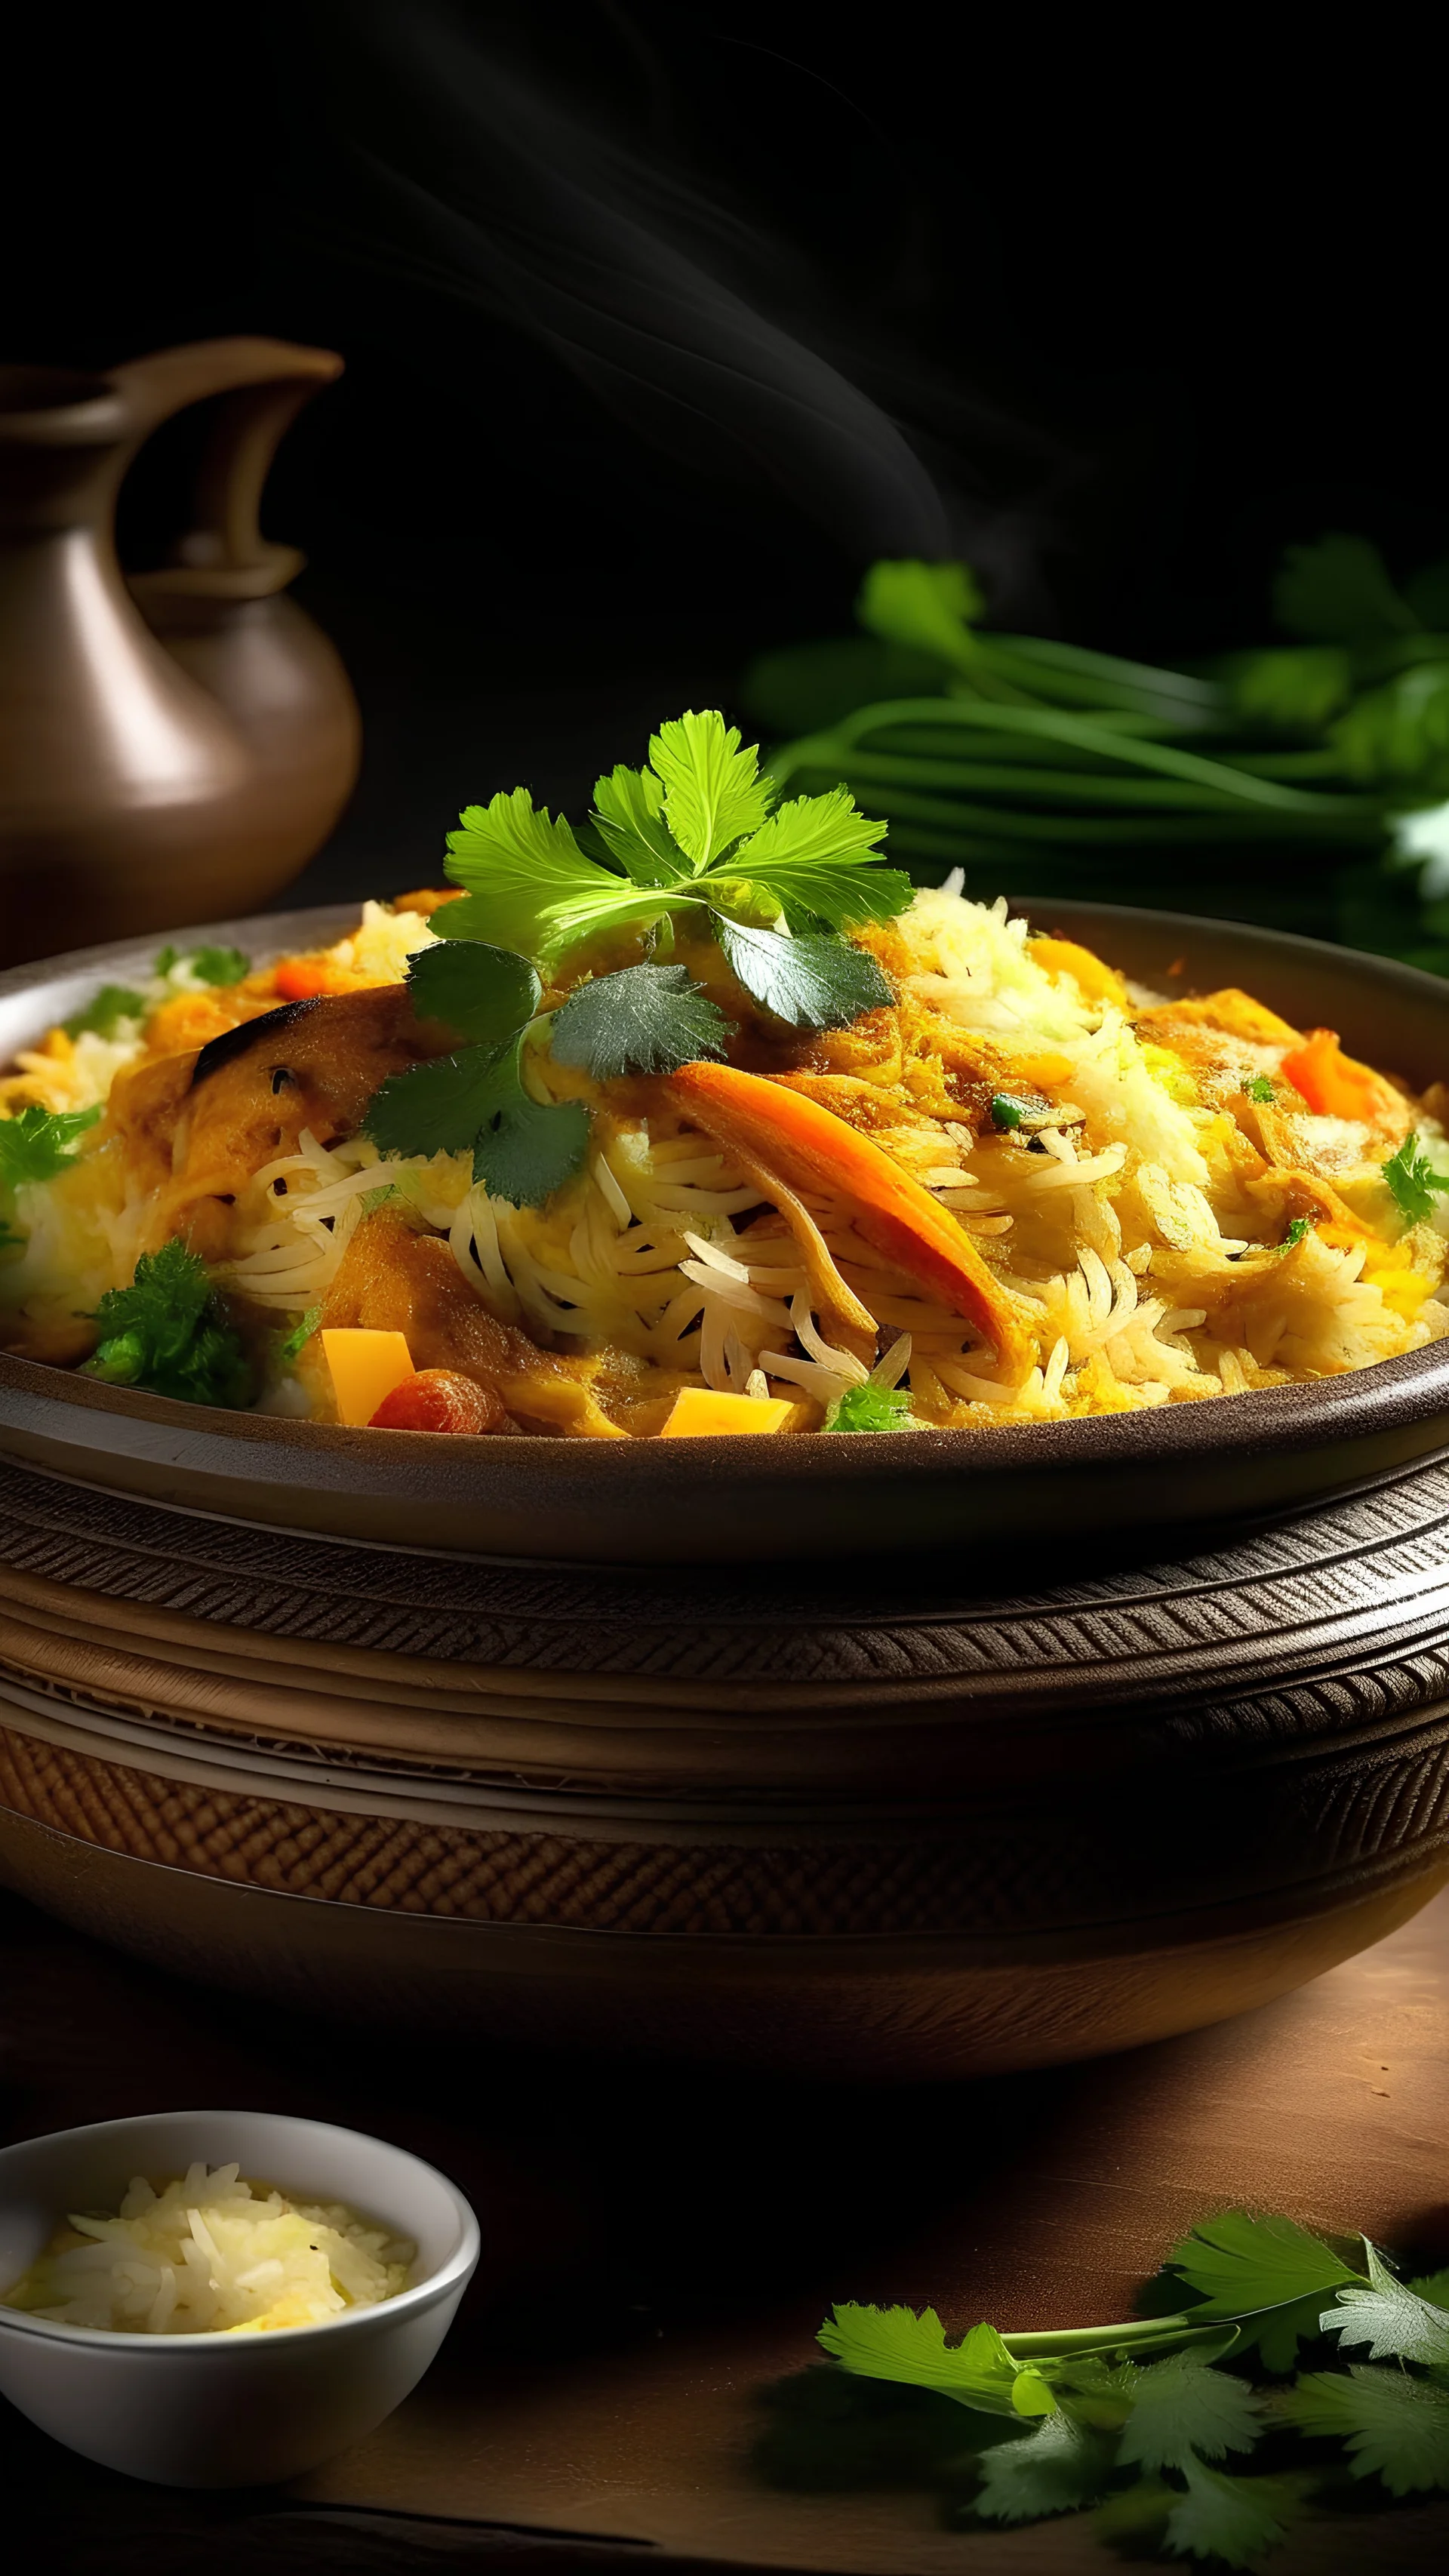 Create an image of a steaming bowl filled with chicken biryani, showcasing the rich blend of spices and herbs infused throughout the dish.